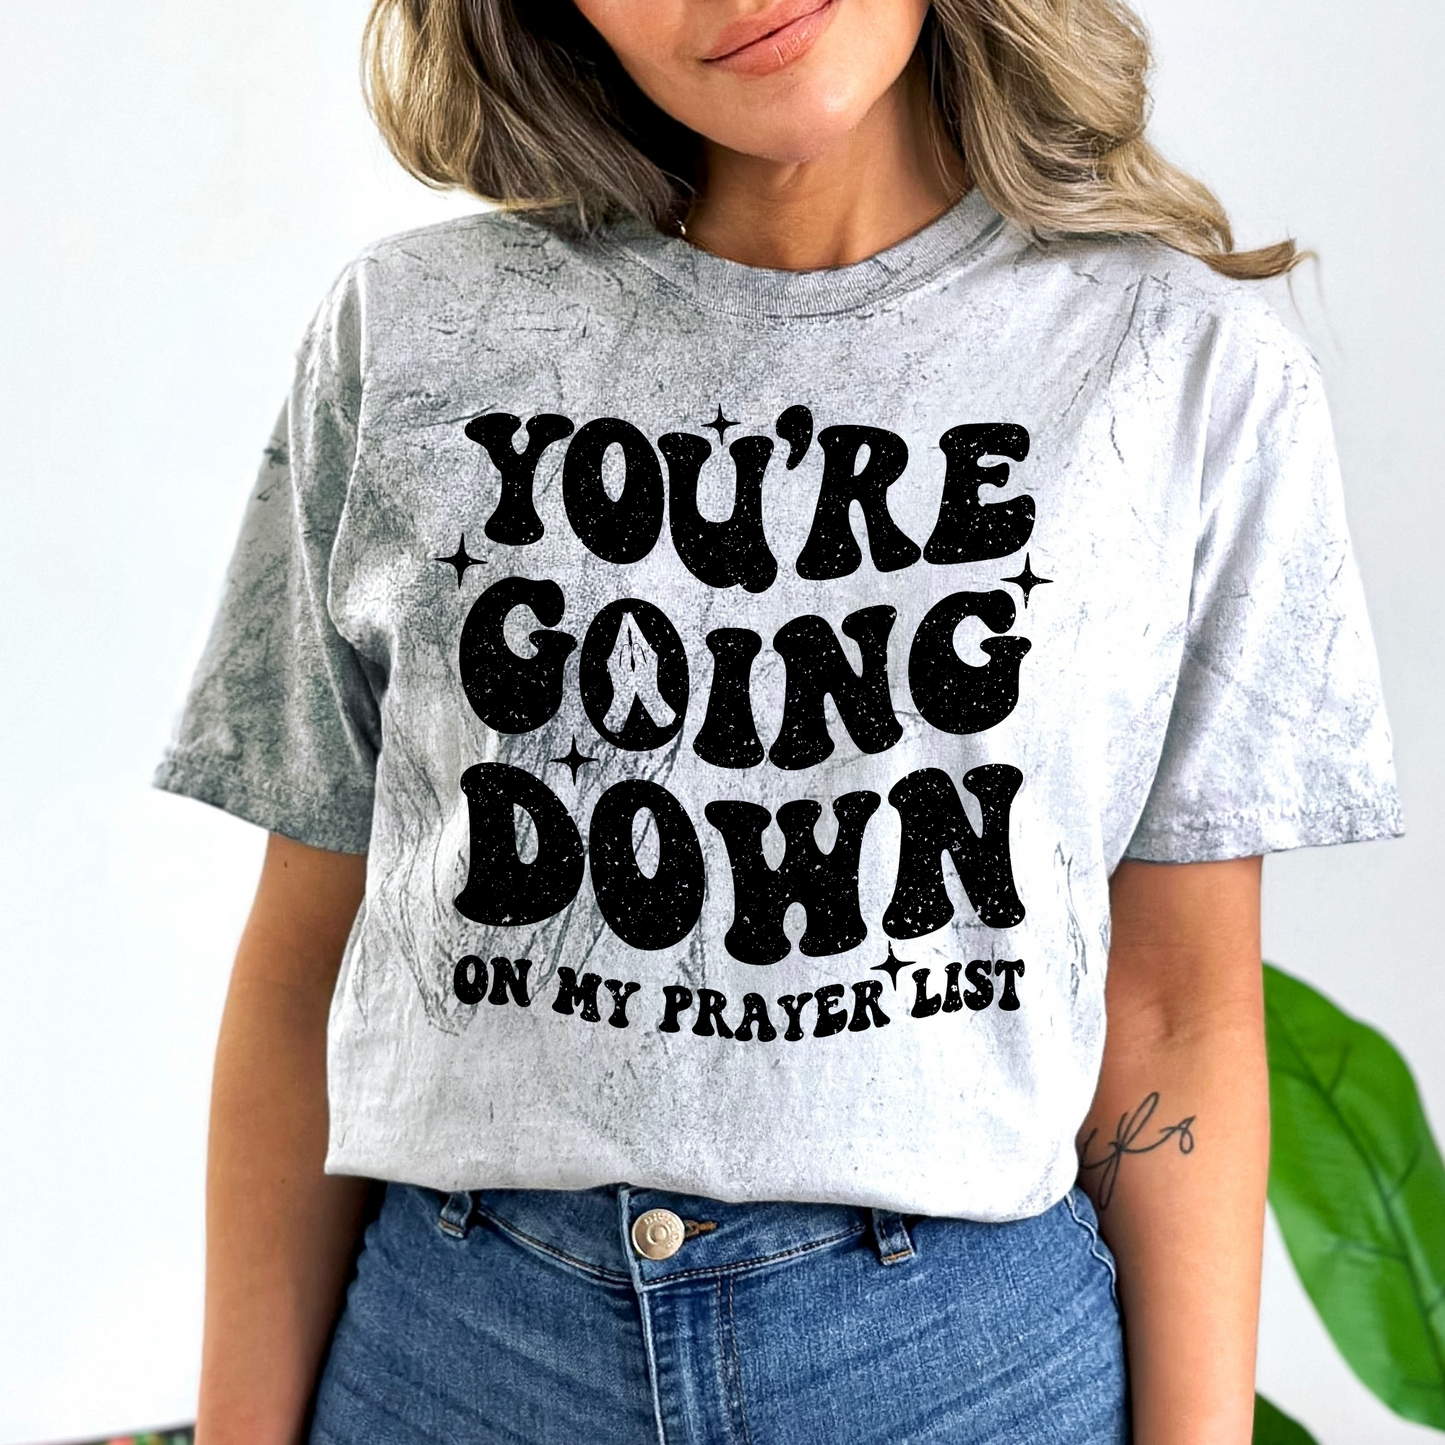 You're going down on my prayer list color blast tee